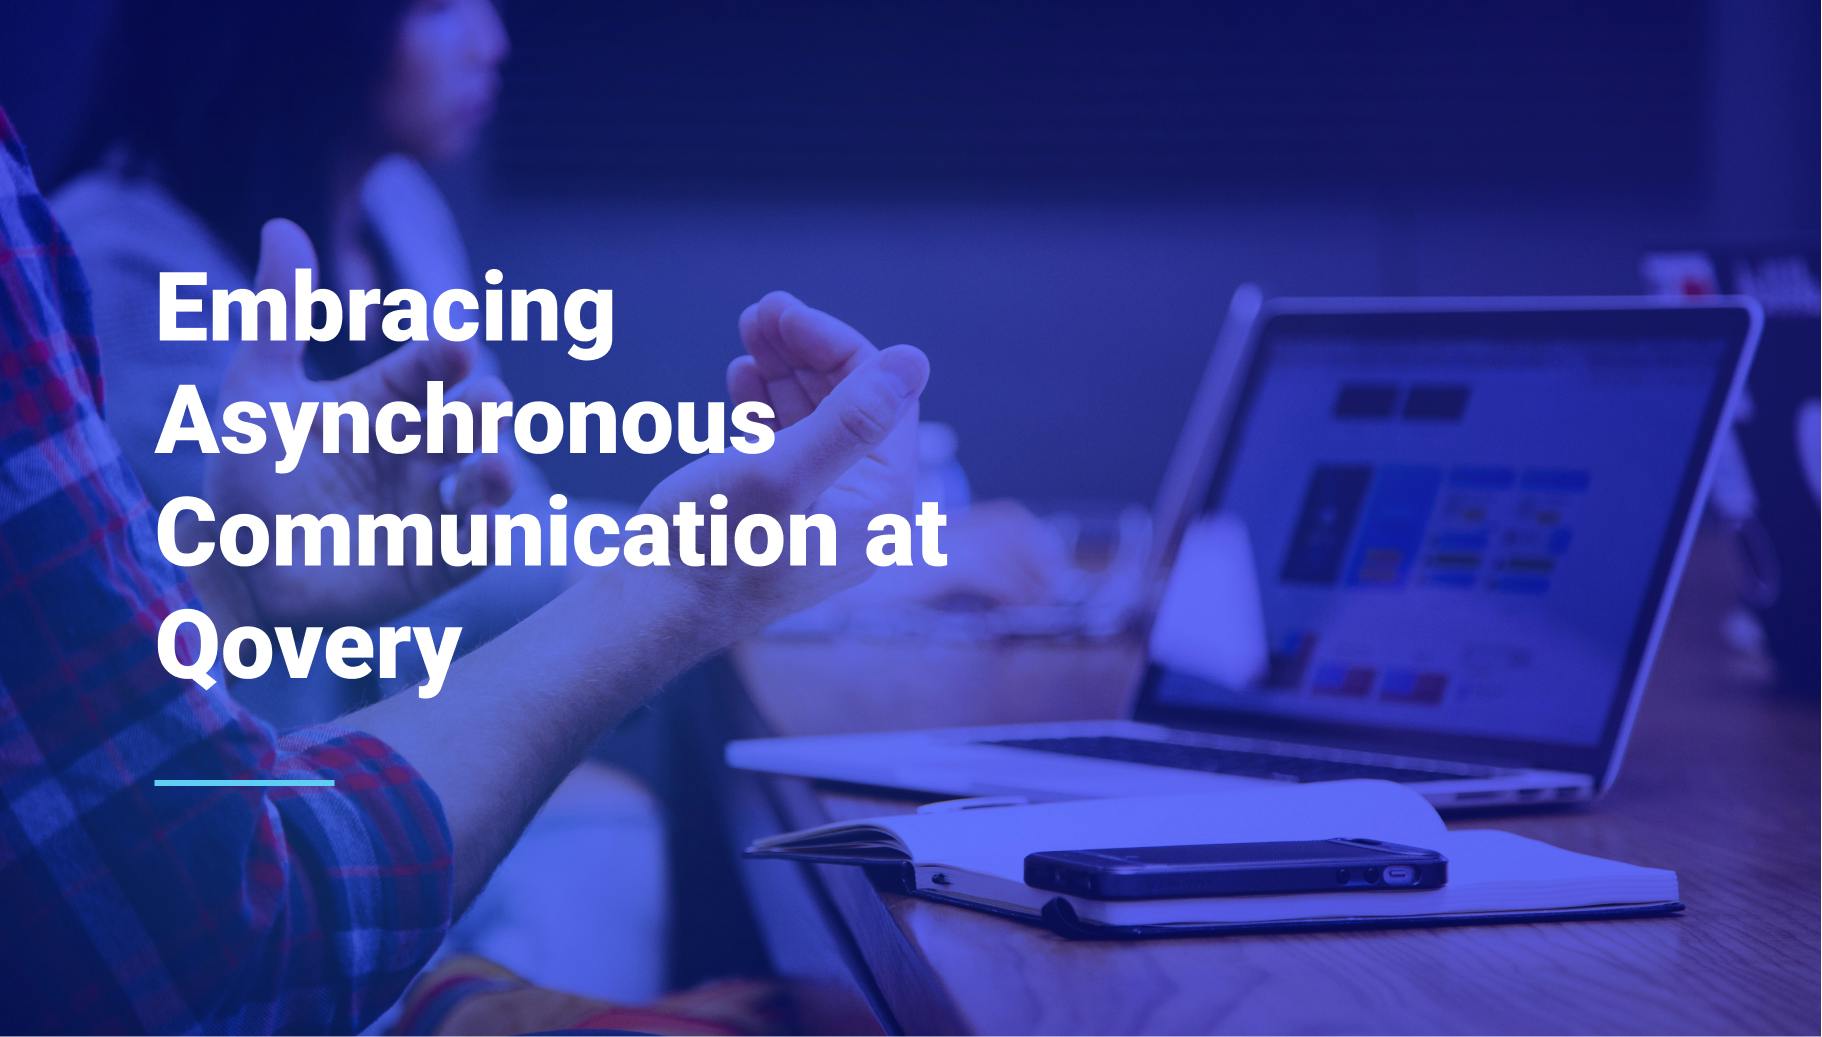 Embracing Asynchronous Communication at Qovery - Qovery